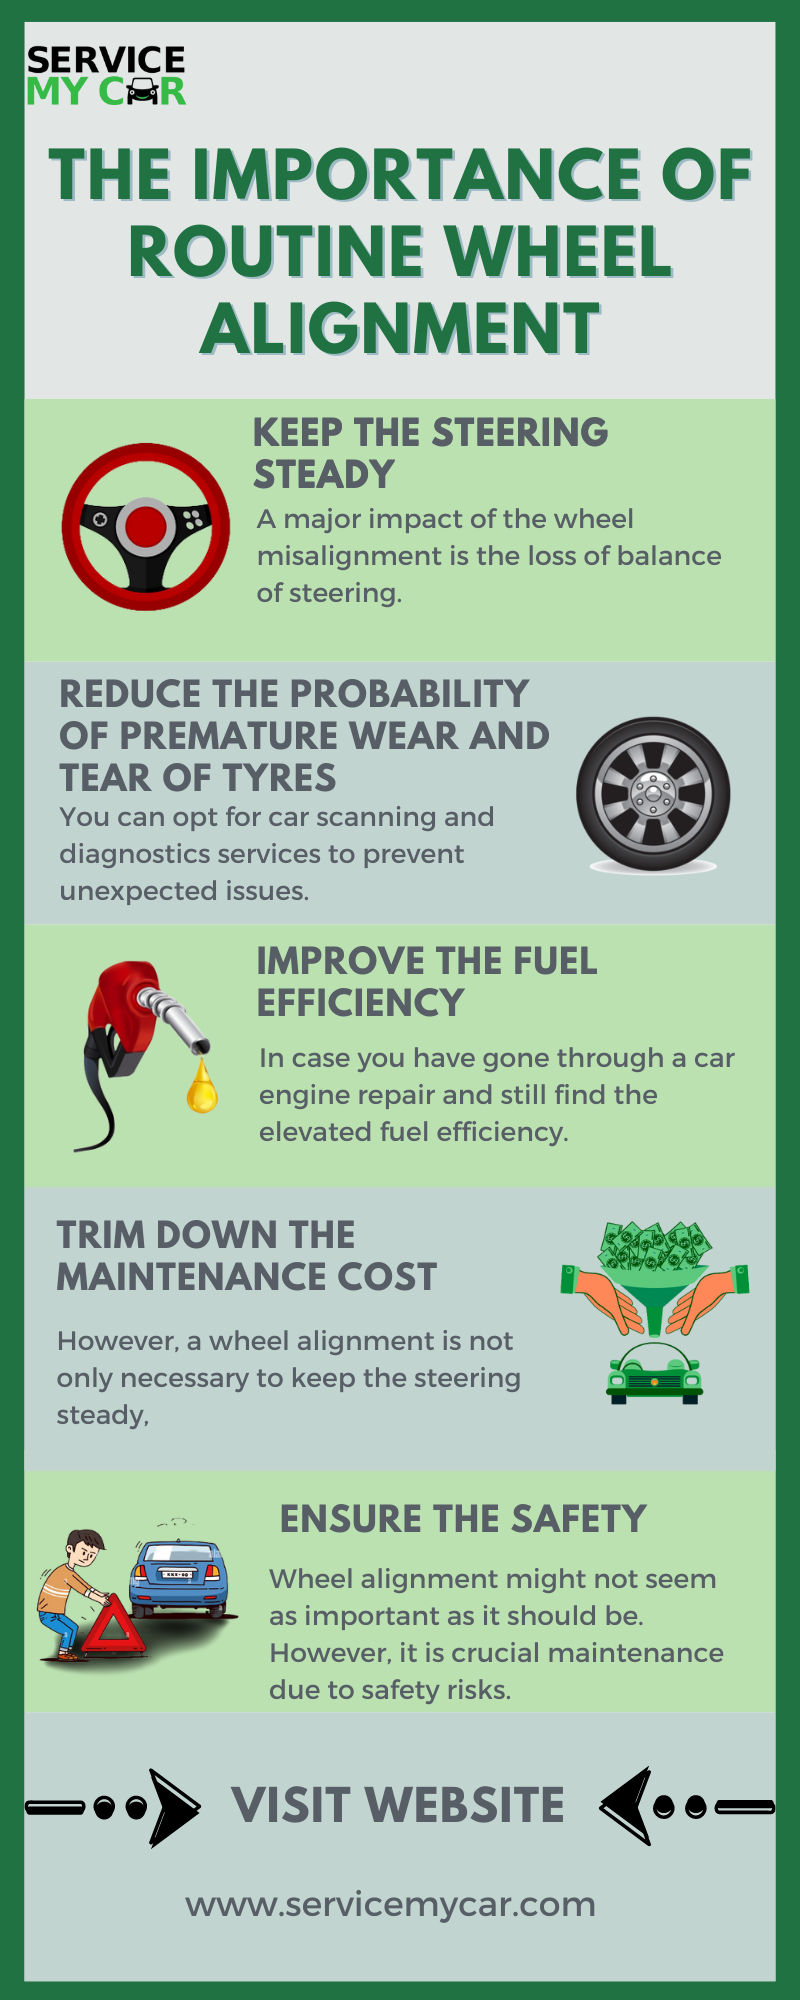 The Importance of Routine Wheel Alignment - Service My Car